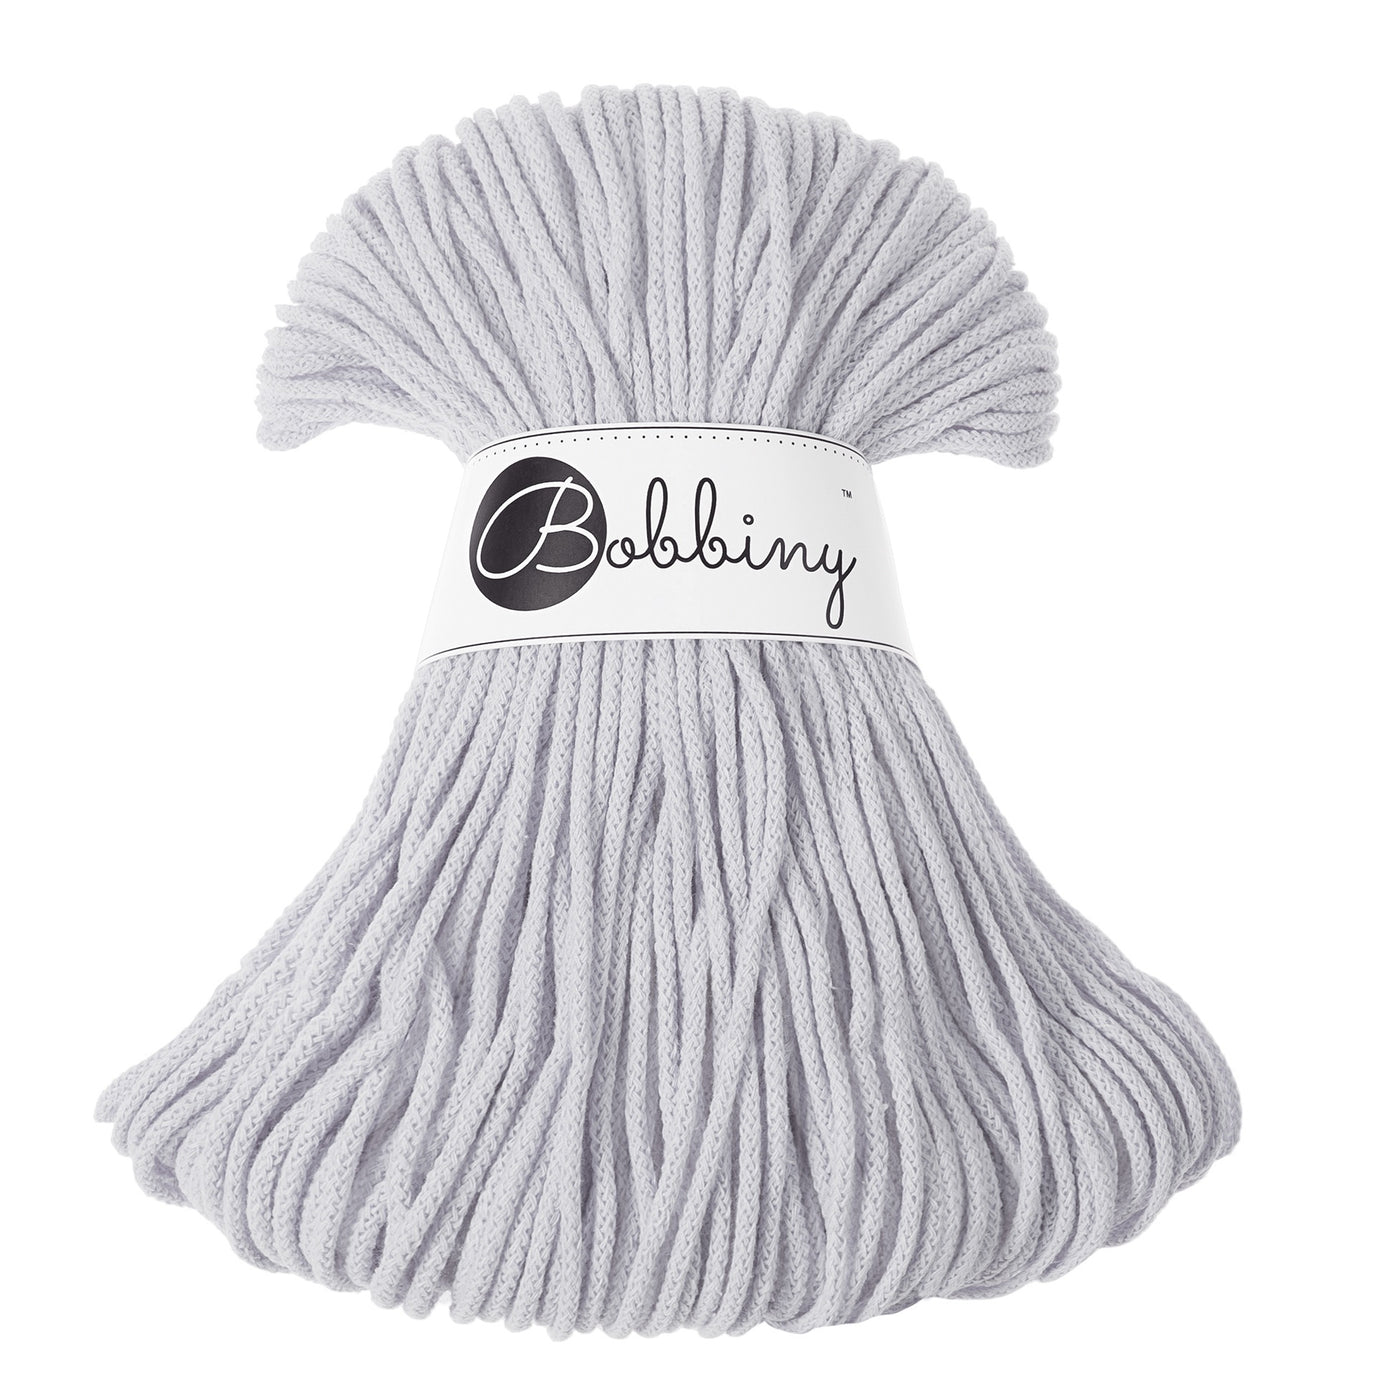 These beautiful Bobbiny cords are made in Poland from 100% recycled cottons and are non-toxic, certified safe for children and meet certified worldwide textile standards.  3mm Diameter  100 metres Length  Recommended for use with 8-10mm crochet or knitting needles  Cotton inner and outer layers   